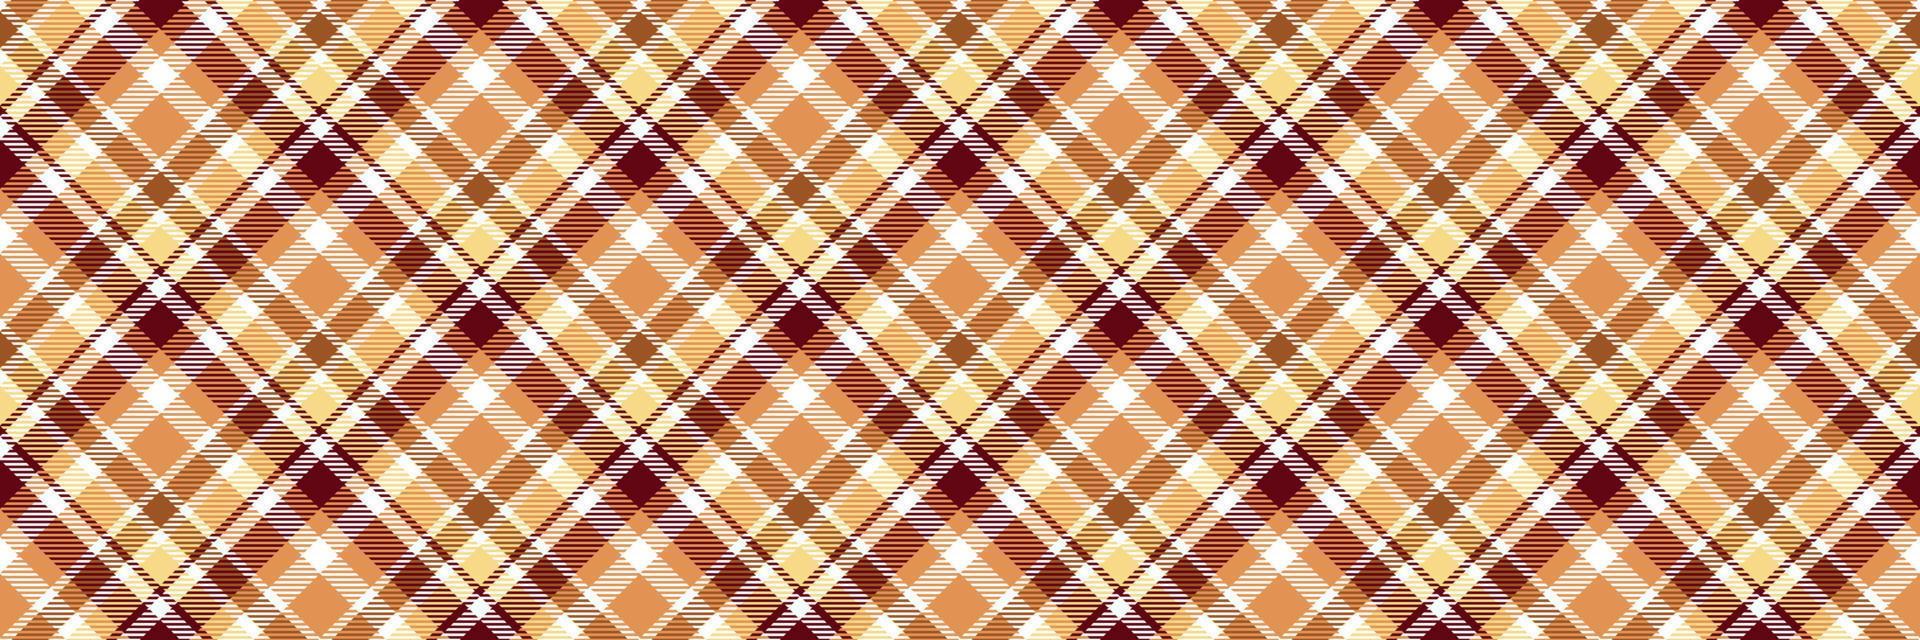 Tartan pattern is a patterned cloth consisting of criss crossed, horizontal and vertical bands in multiple colours.plaid Seamless for  scarf,pyjamas,blanket,duvet,kilt large shawl. vector